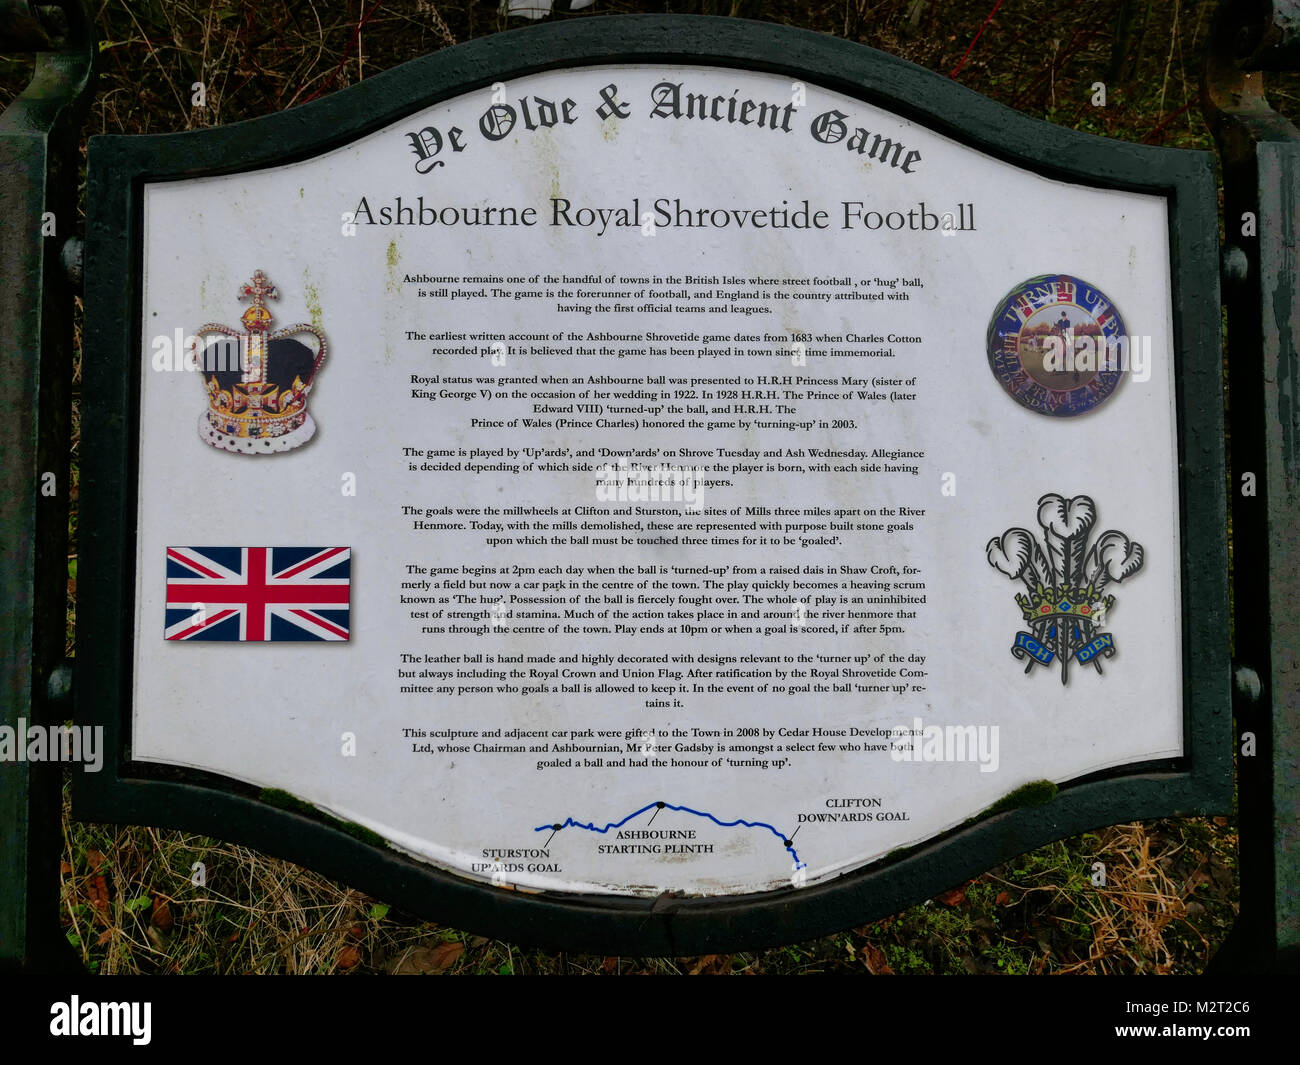 Ashbourne, UK. 8th February, 2018. Preparations start for the Ashbourne Royal Shrovetide Football match which takes place on Shrove Tuesday & Ash Wednesday every year. Ye Olde & Ancient Medieval hugball game is the forerunner to football dating from 1683 when Charles Cotton's poem Burlesque upon the Great Frost, cousin of Aston Cockayne Baronet of Ashbourne, Derbyshire. Credit: Doug Blane/Alamy Live News Stock Photo